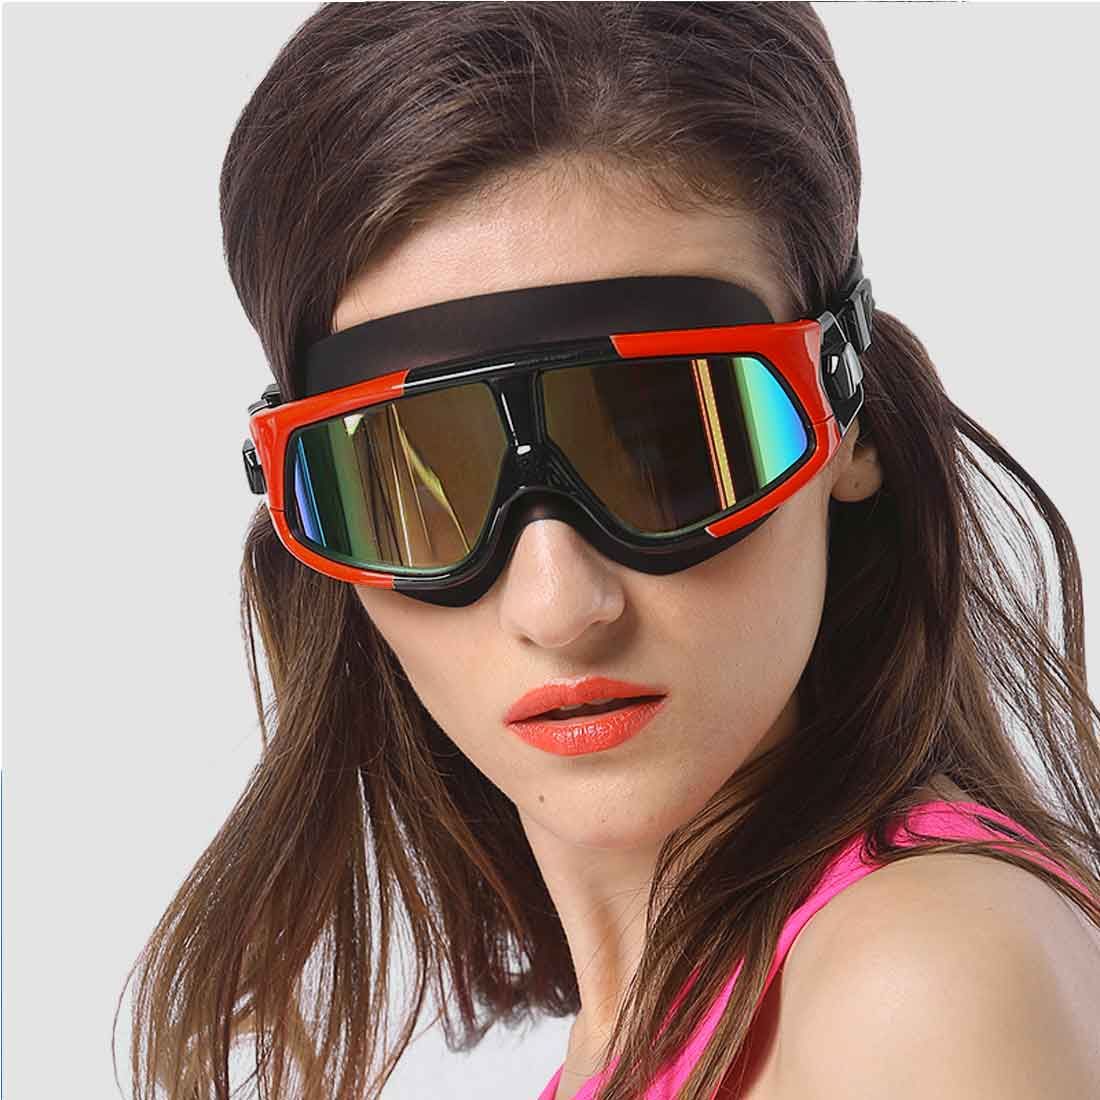 swimming goggles that go over glasses